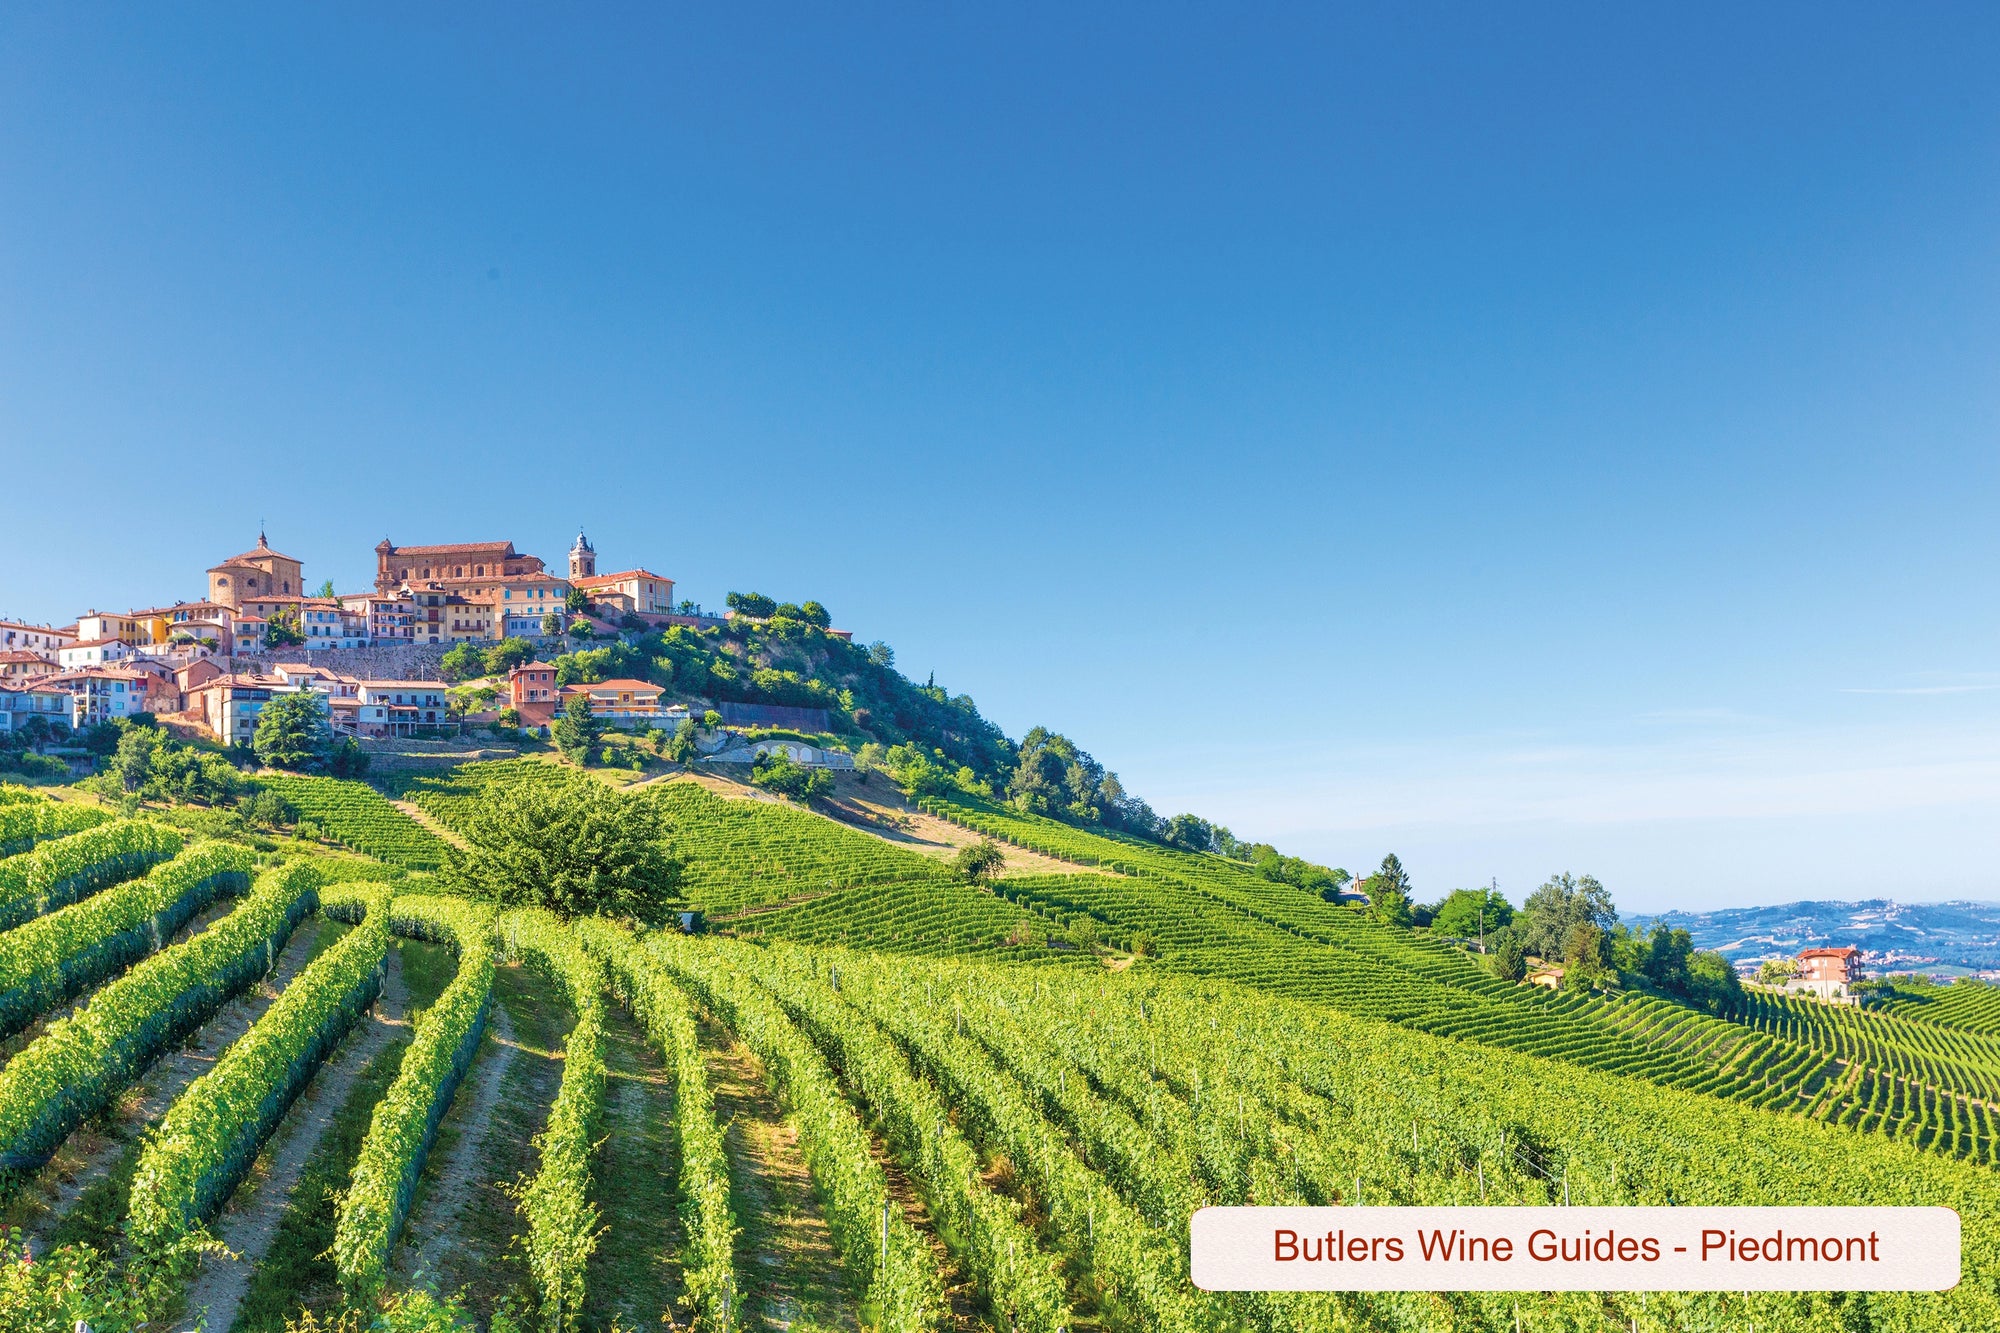 Butlers Wine Guides - Piedmont